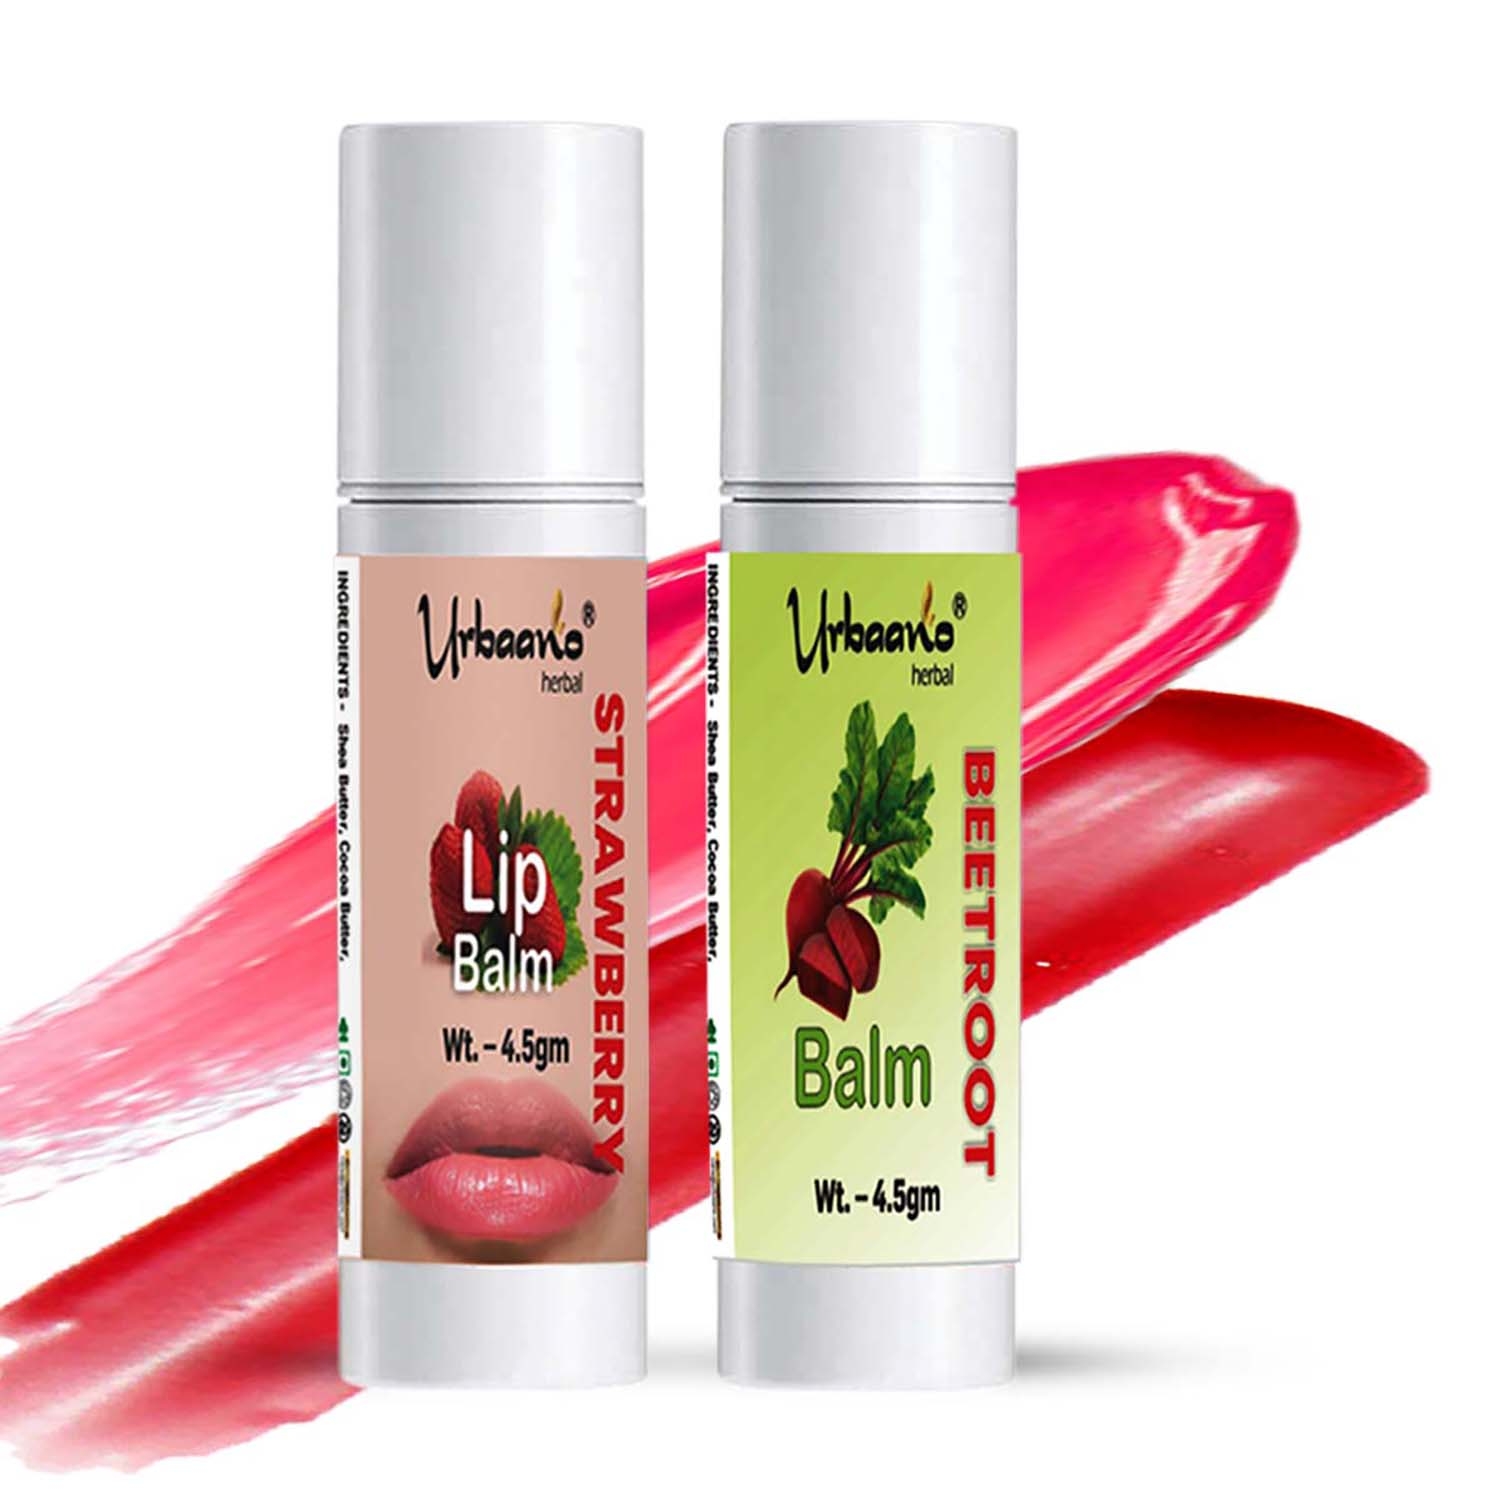 Urbaano Herbal Strawberry & Beetroot Tint Color Lip Balm Combo, ECOCERT Squalane with Natural SPF, Ultra Moisturization–Women & Teens-4.5gm each